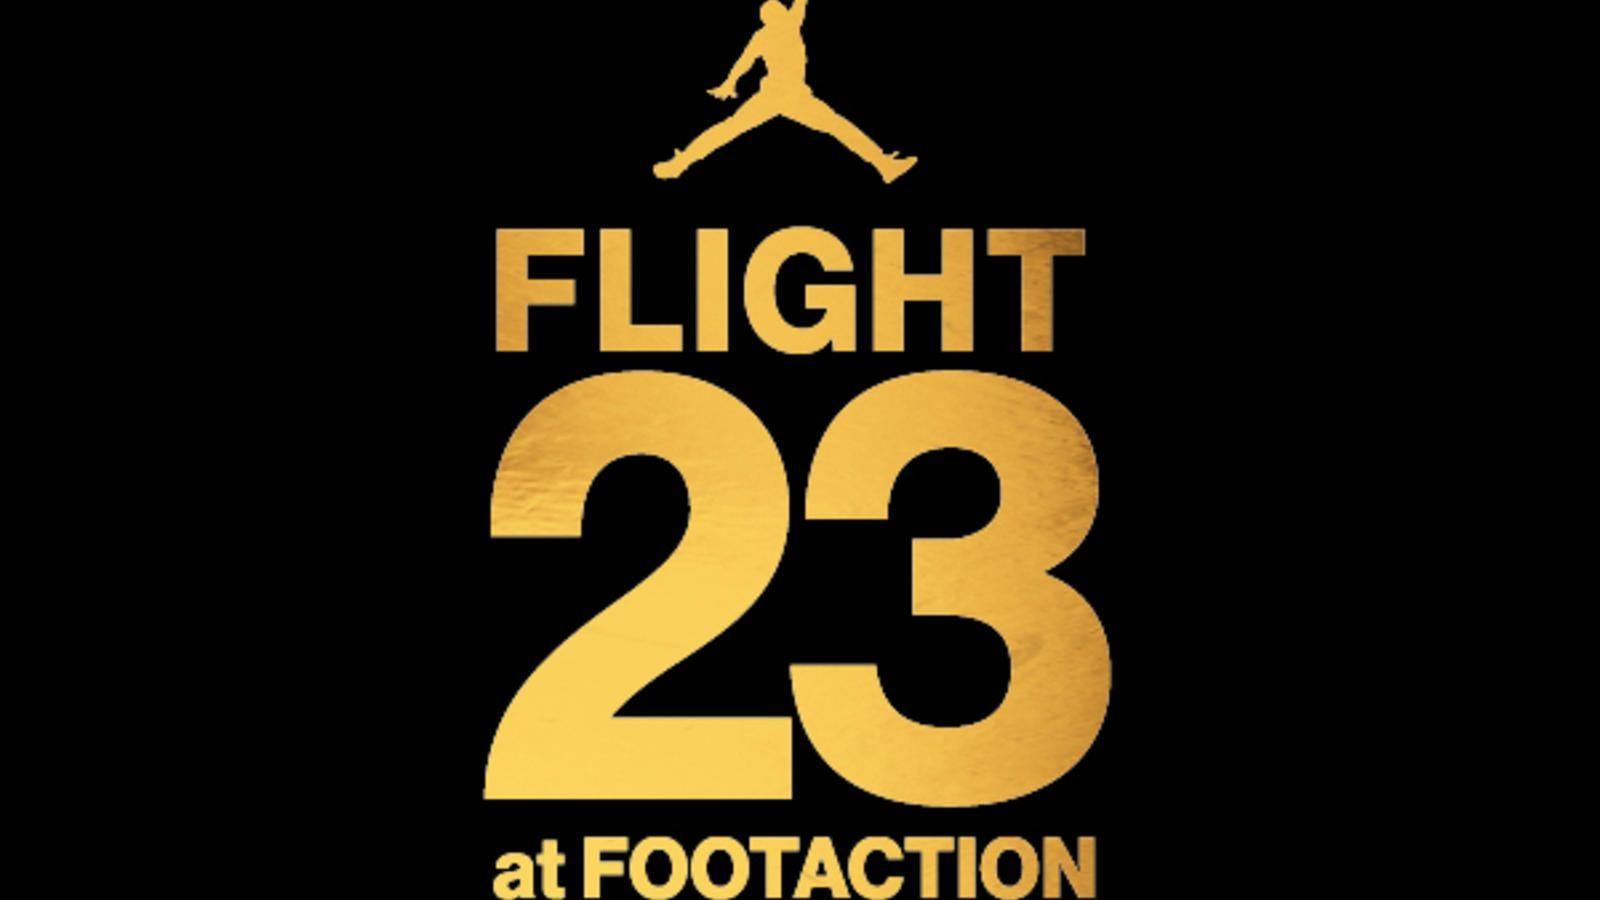 Nike Flight Logo - Flight 23 at Footaction to be First North America Jordan-only retail ...